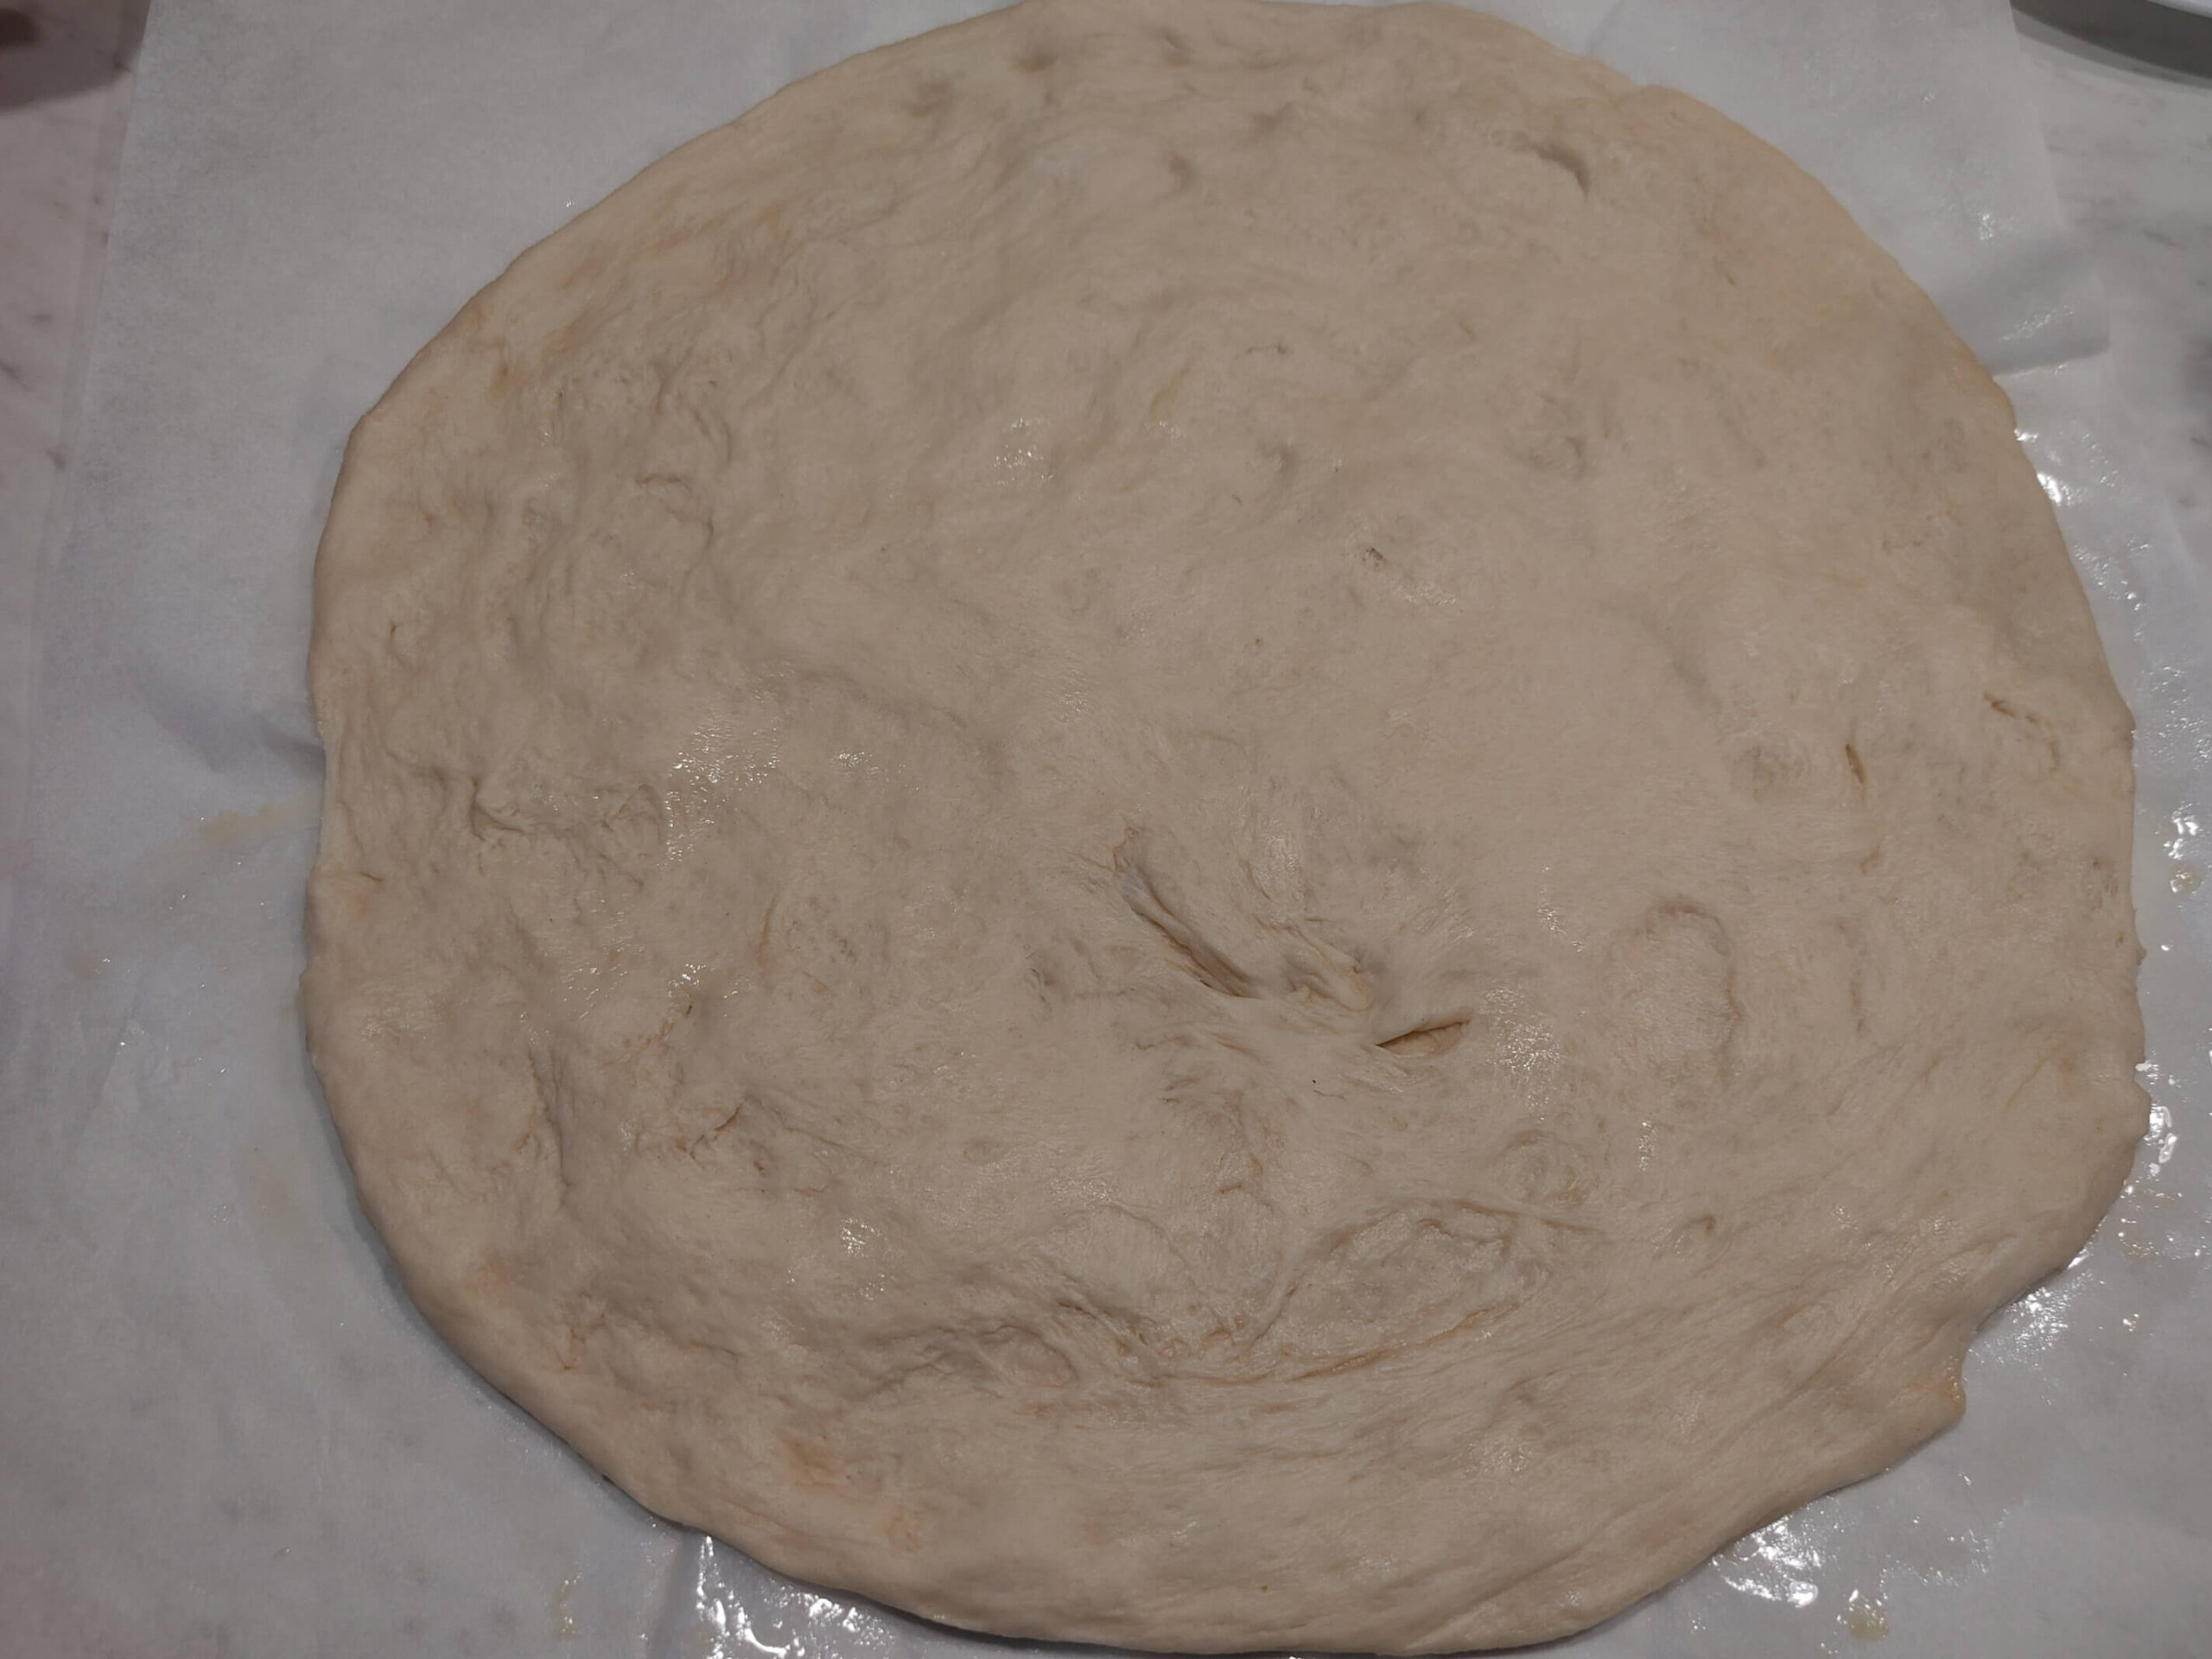 Spreading the dough on parchment paper